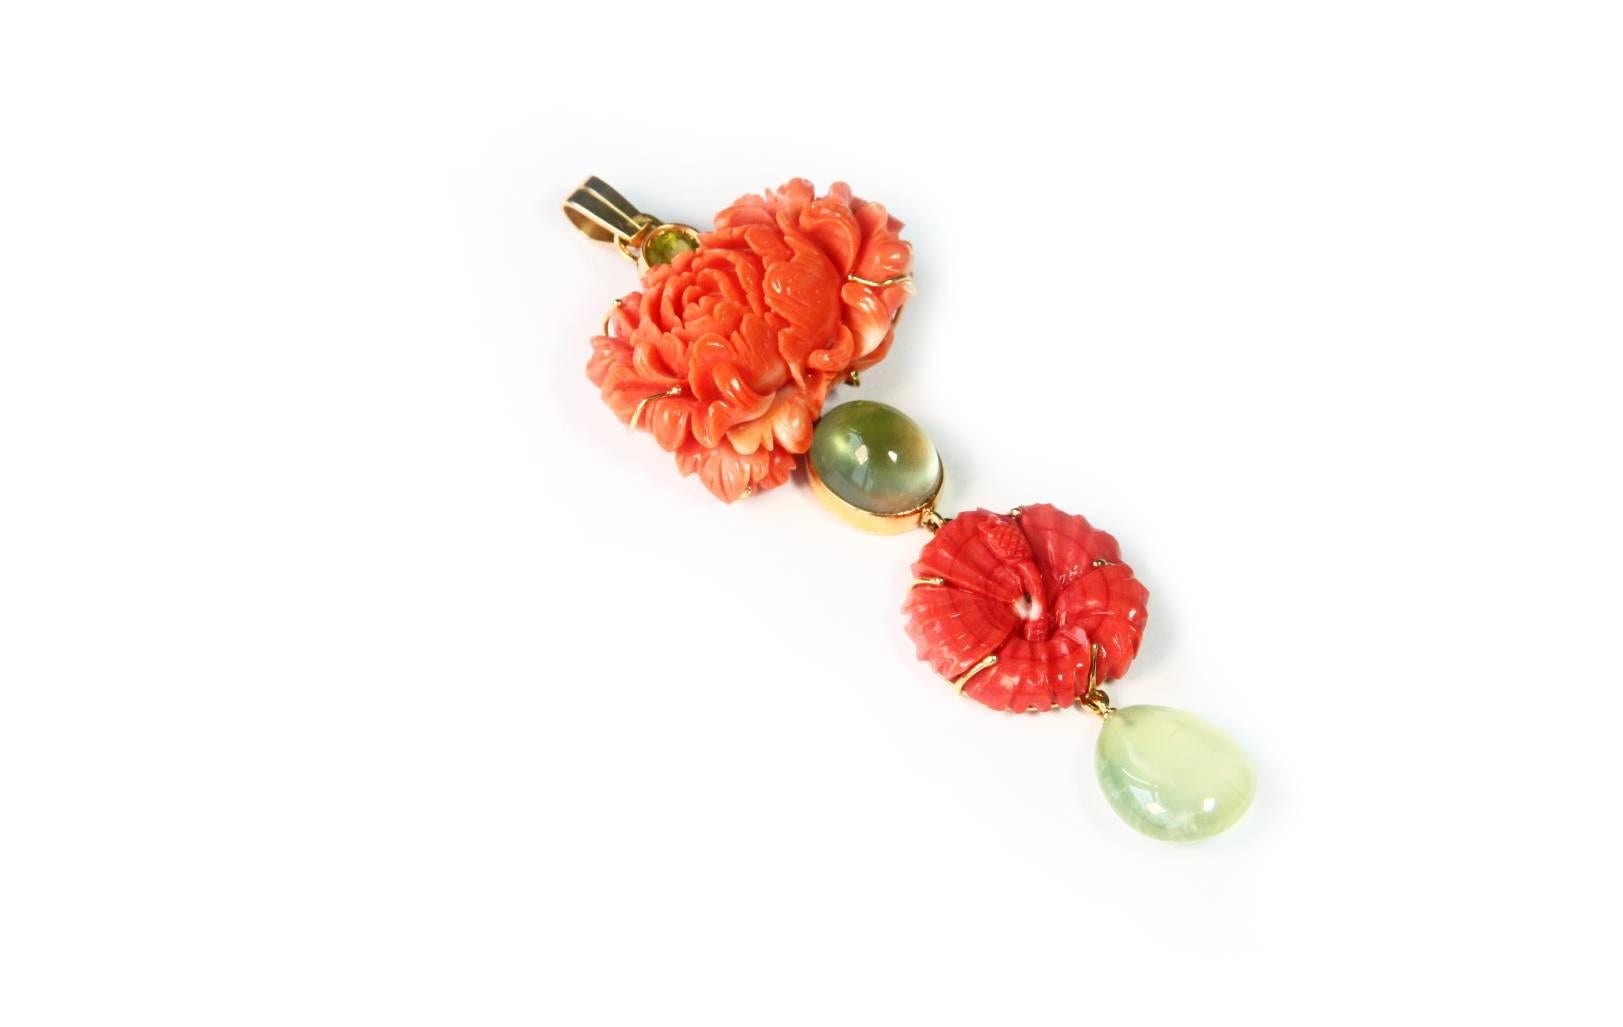 Pendant 11 cm fine carved Japanies coral peony and hibiscus flowers, peridot and phrenite stone  cabochon end drop.
18kt Gold 10,60. You can wear with silk string or gold necklace that is not included but available upon request.
All jewelry is new